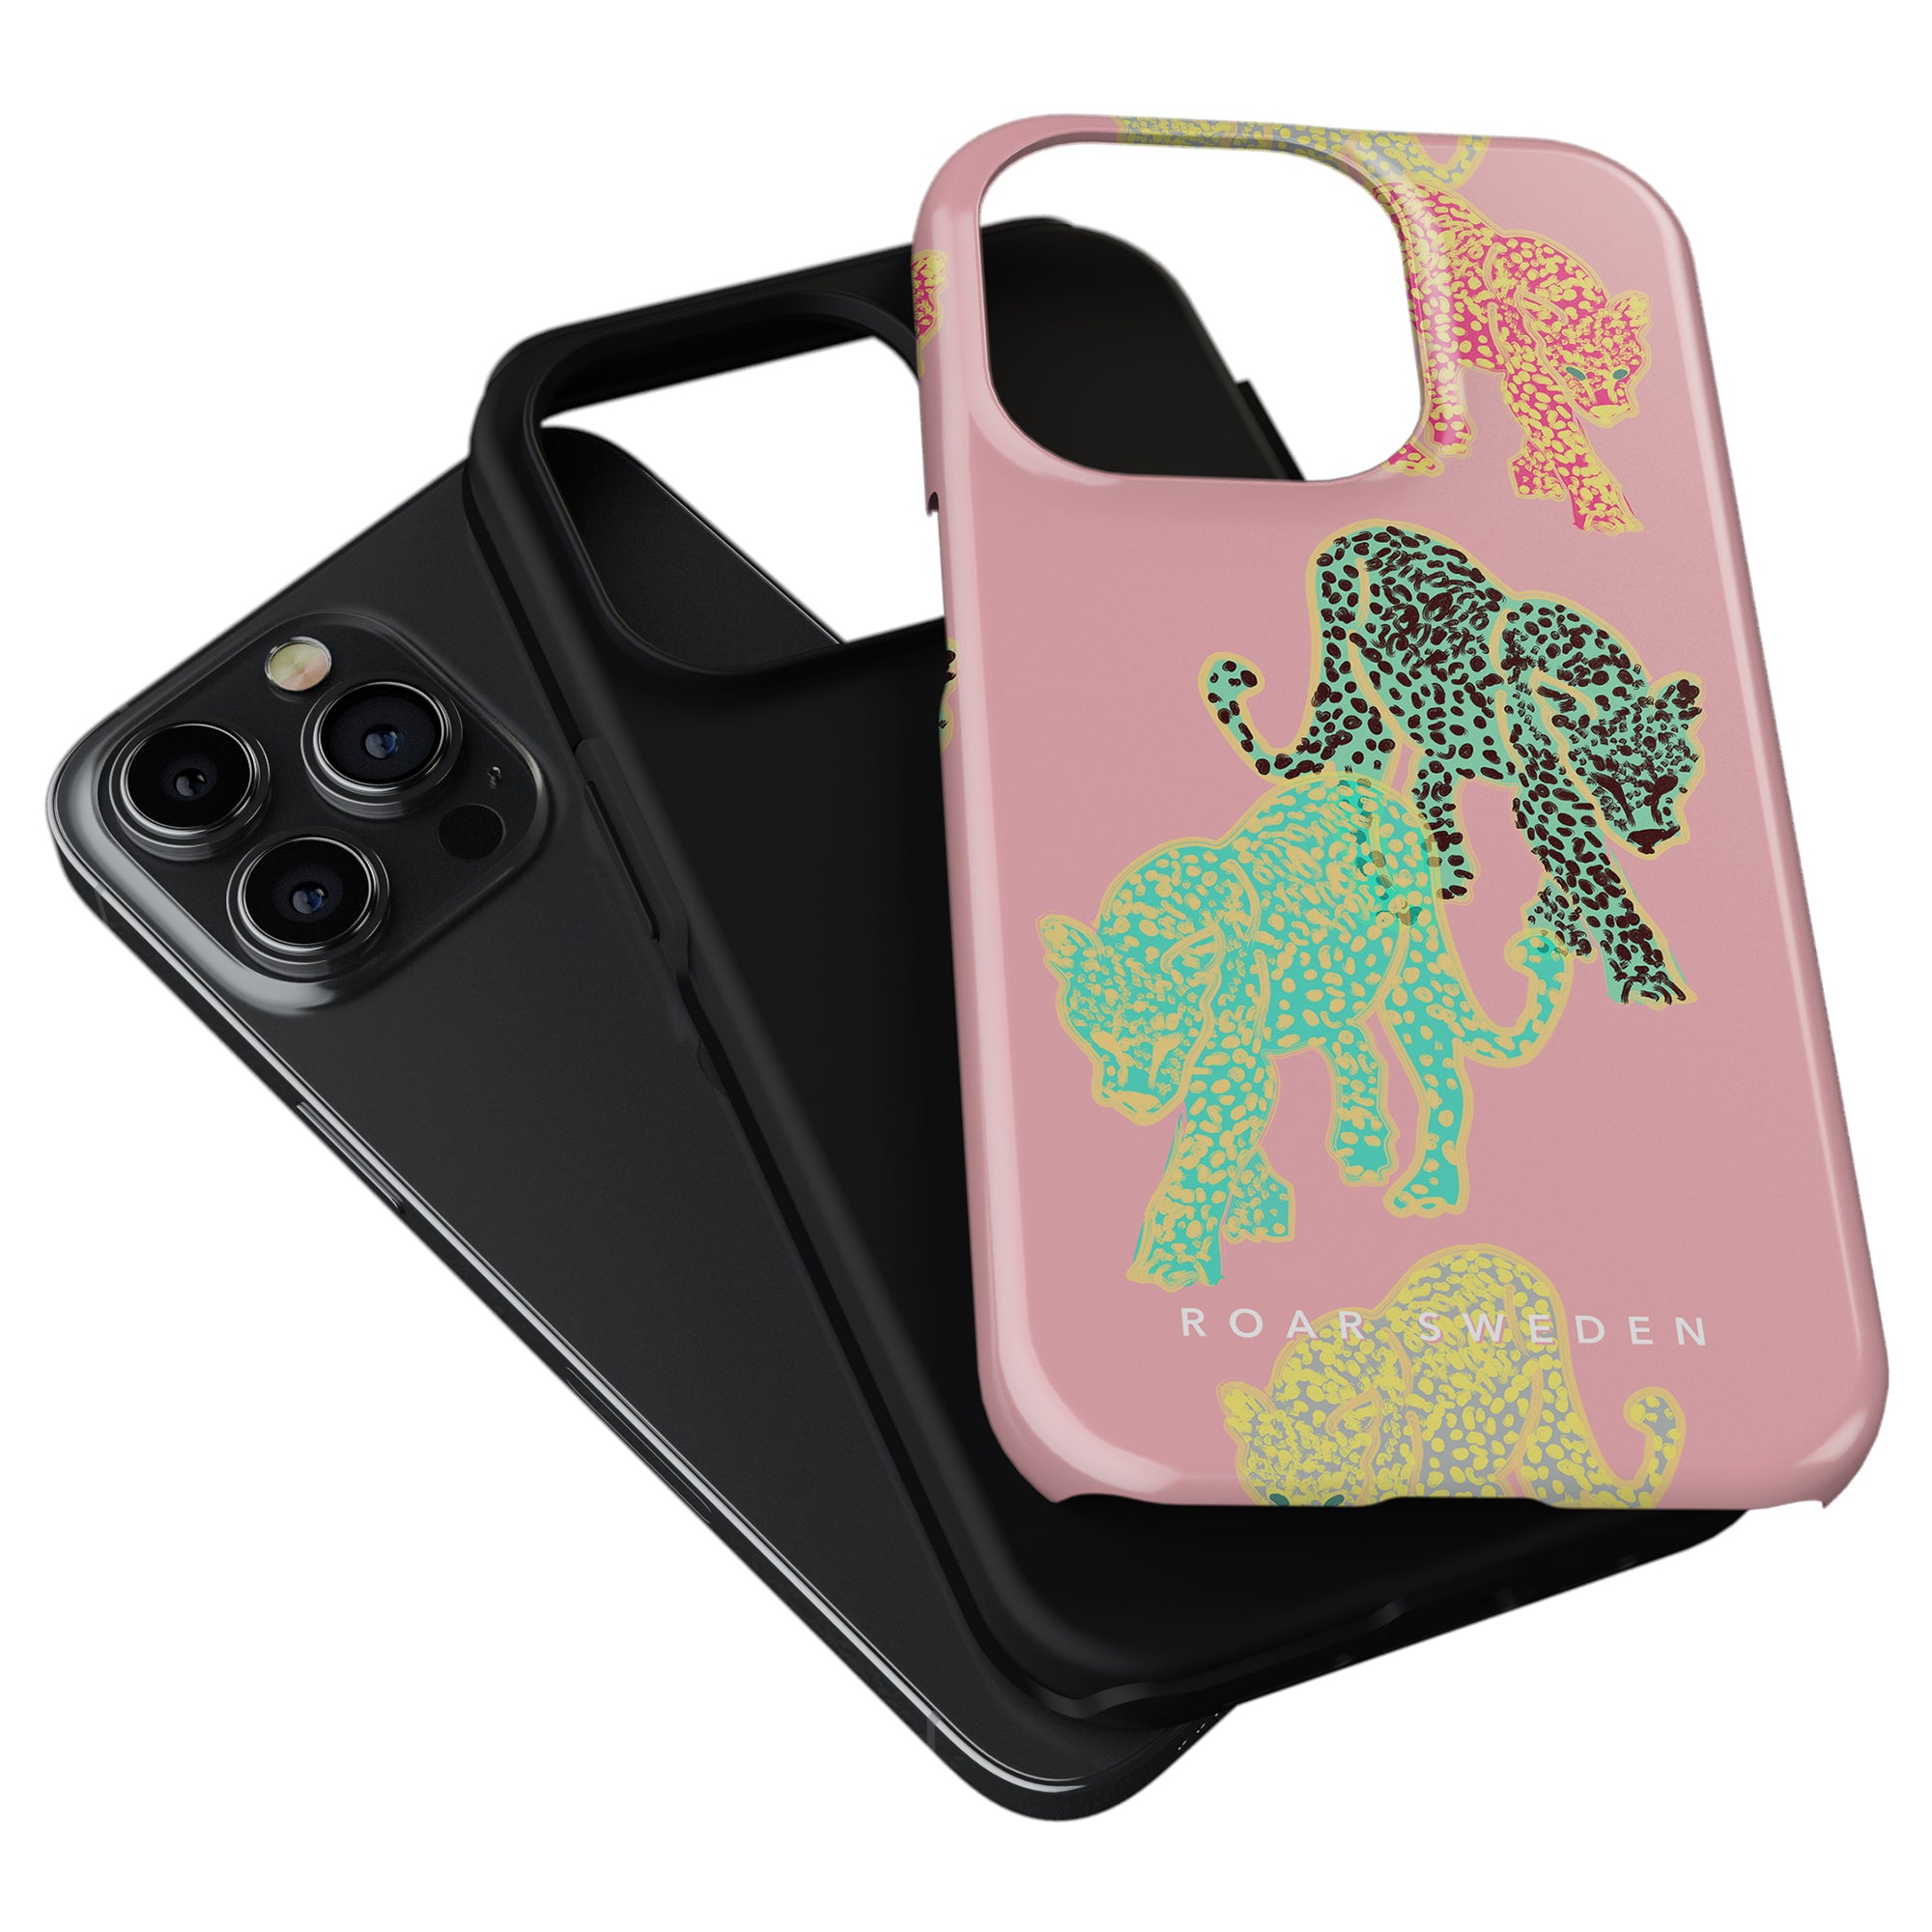 A pink Meow - Tough Case with a green and yellow elephant design from the Leopard kollektion alongside a black smartphone with a triple-lens camera.